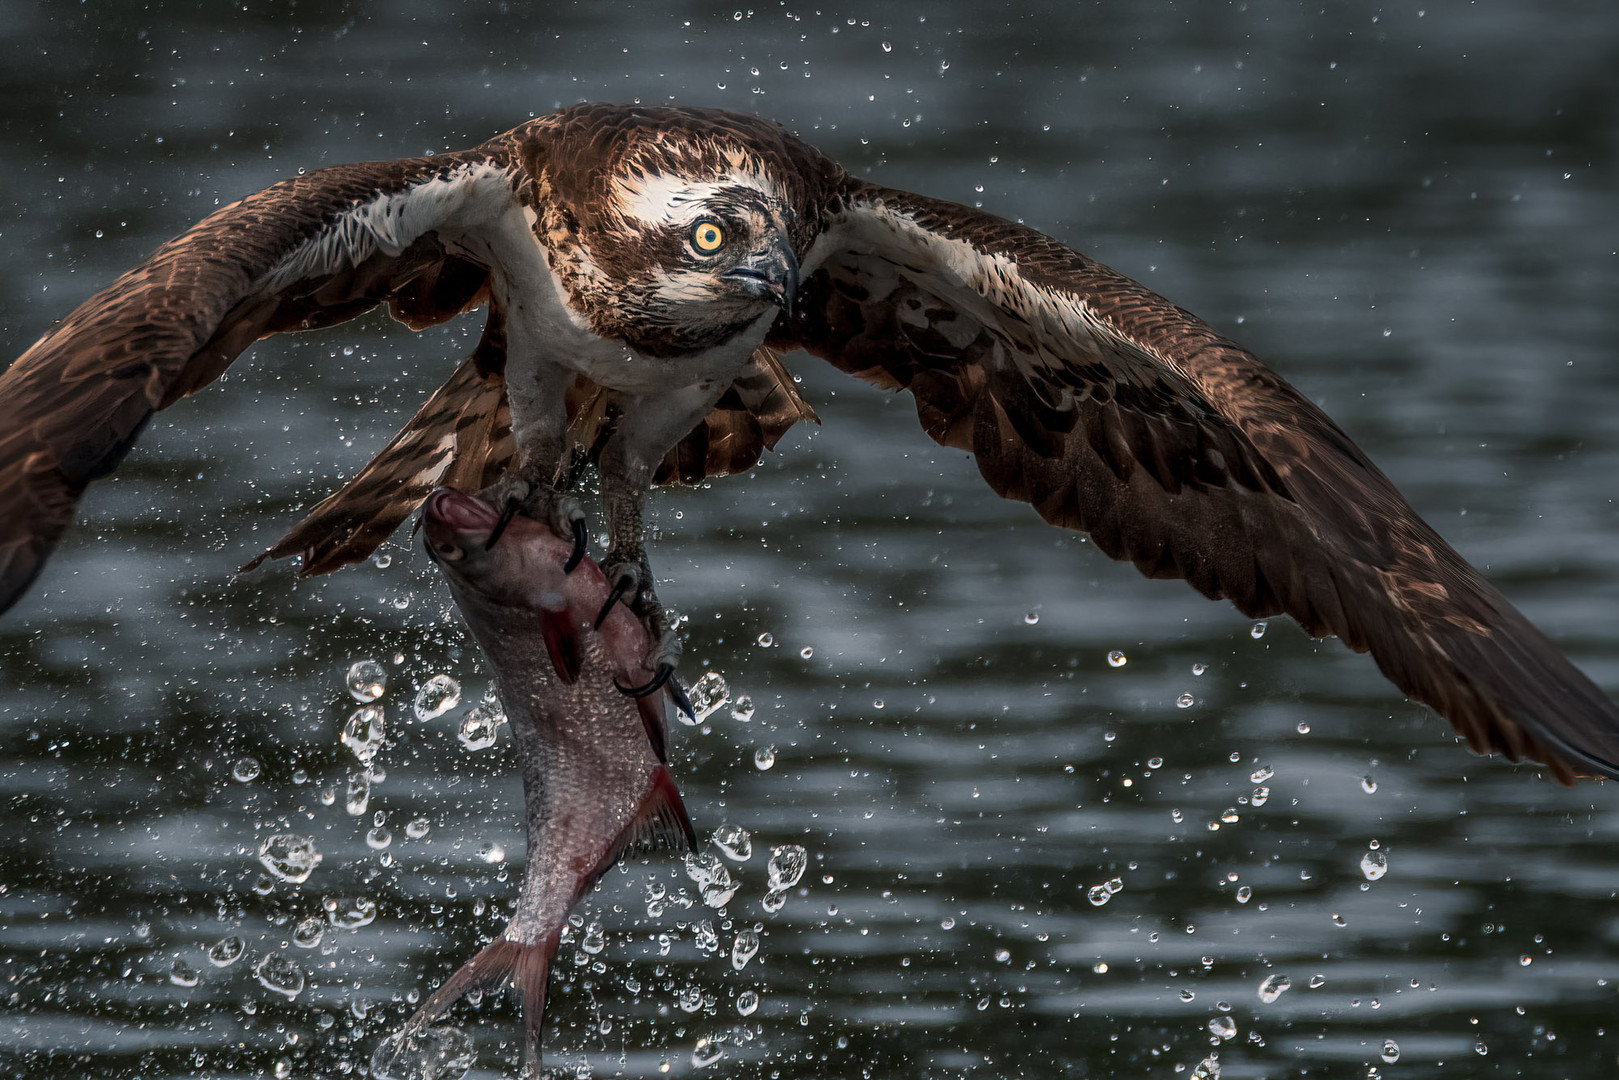 Osprey taking off with catch